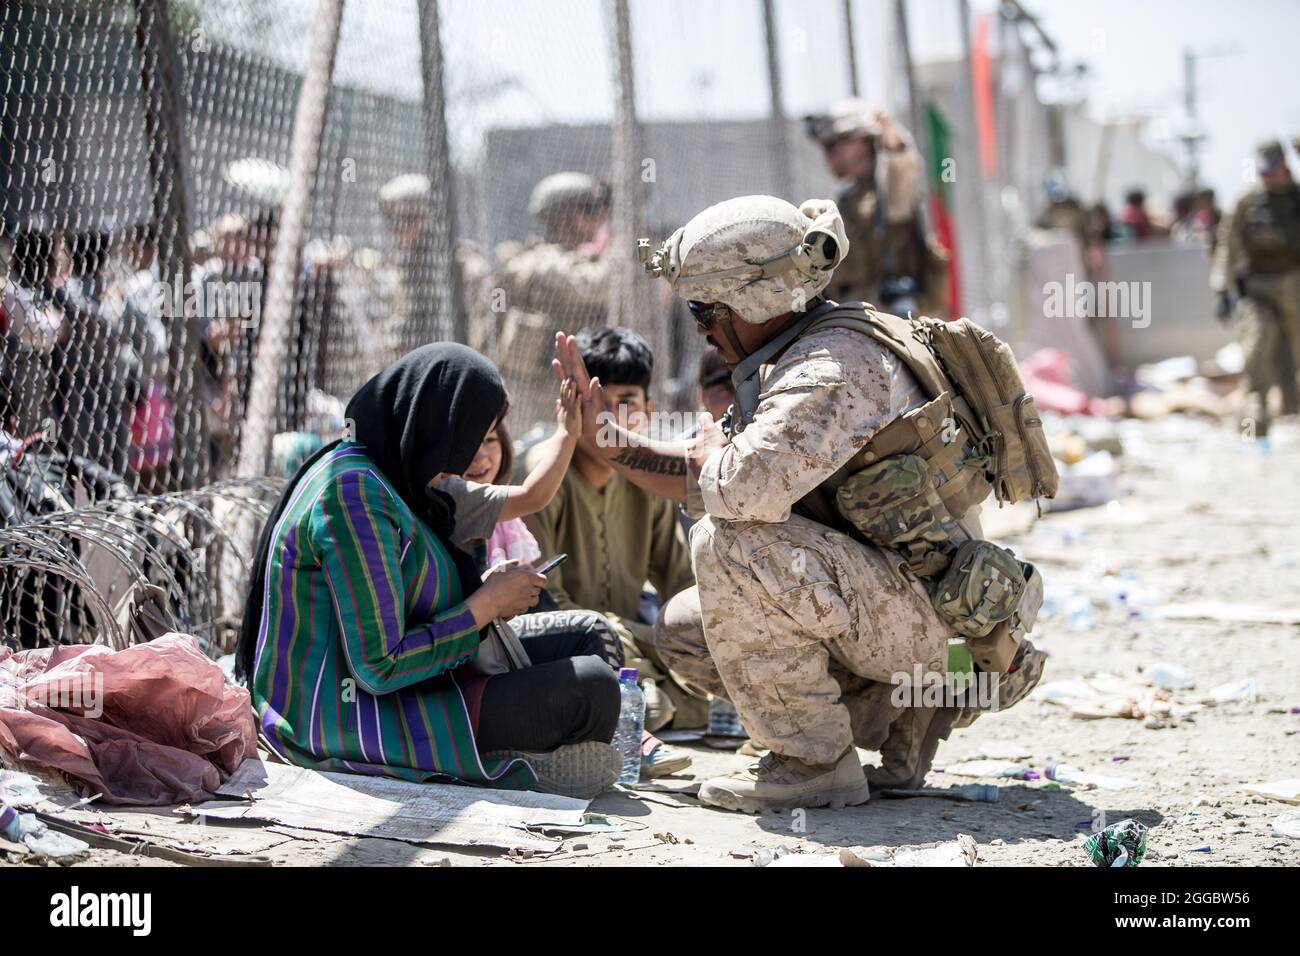 Kabul, Afghanistan. 25th Aug, 2021. A U.S. Marine with the Special Purpose Marine Air-Ground Task Force Crisis Response team, high fives an Afghan child at the Evacuation Control Center at Hamid Karzai International Airport during Operation Allies Refuge August 26, 2021 in Kabul, Afghanistan. Credit: Planetpix/Alamy Live News Stock Photo